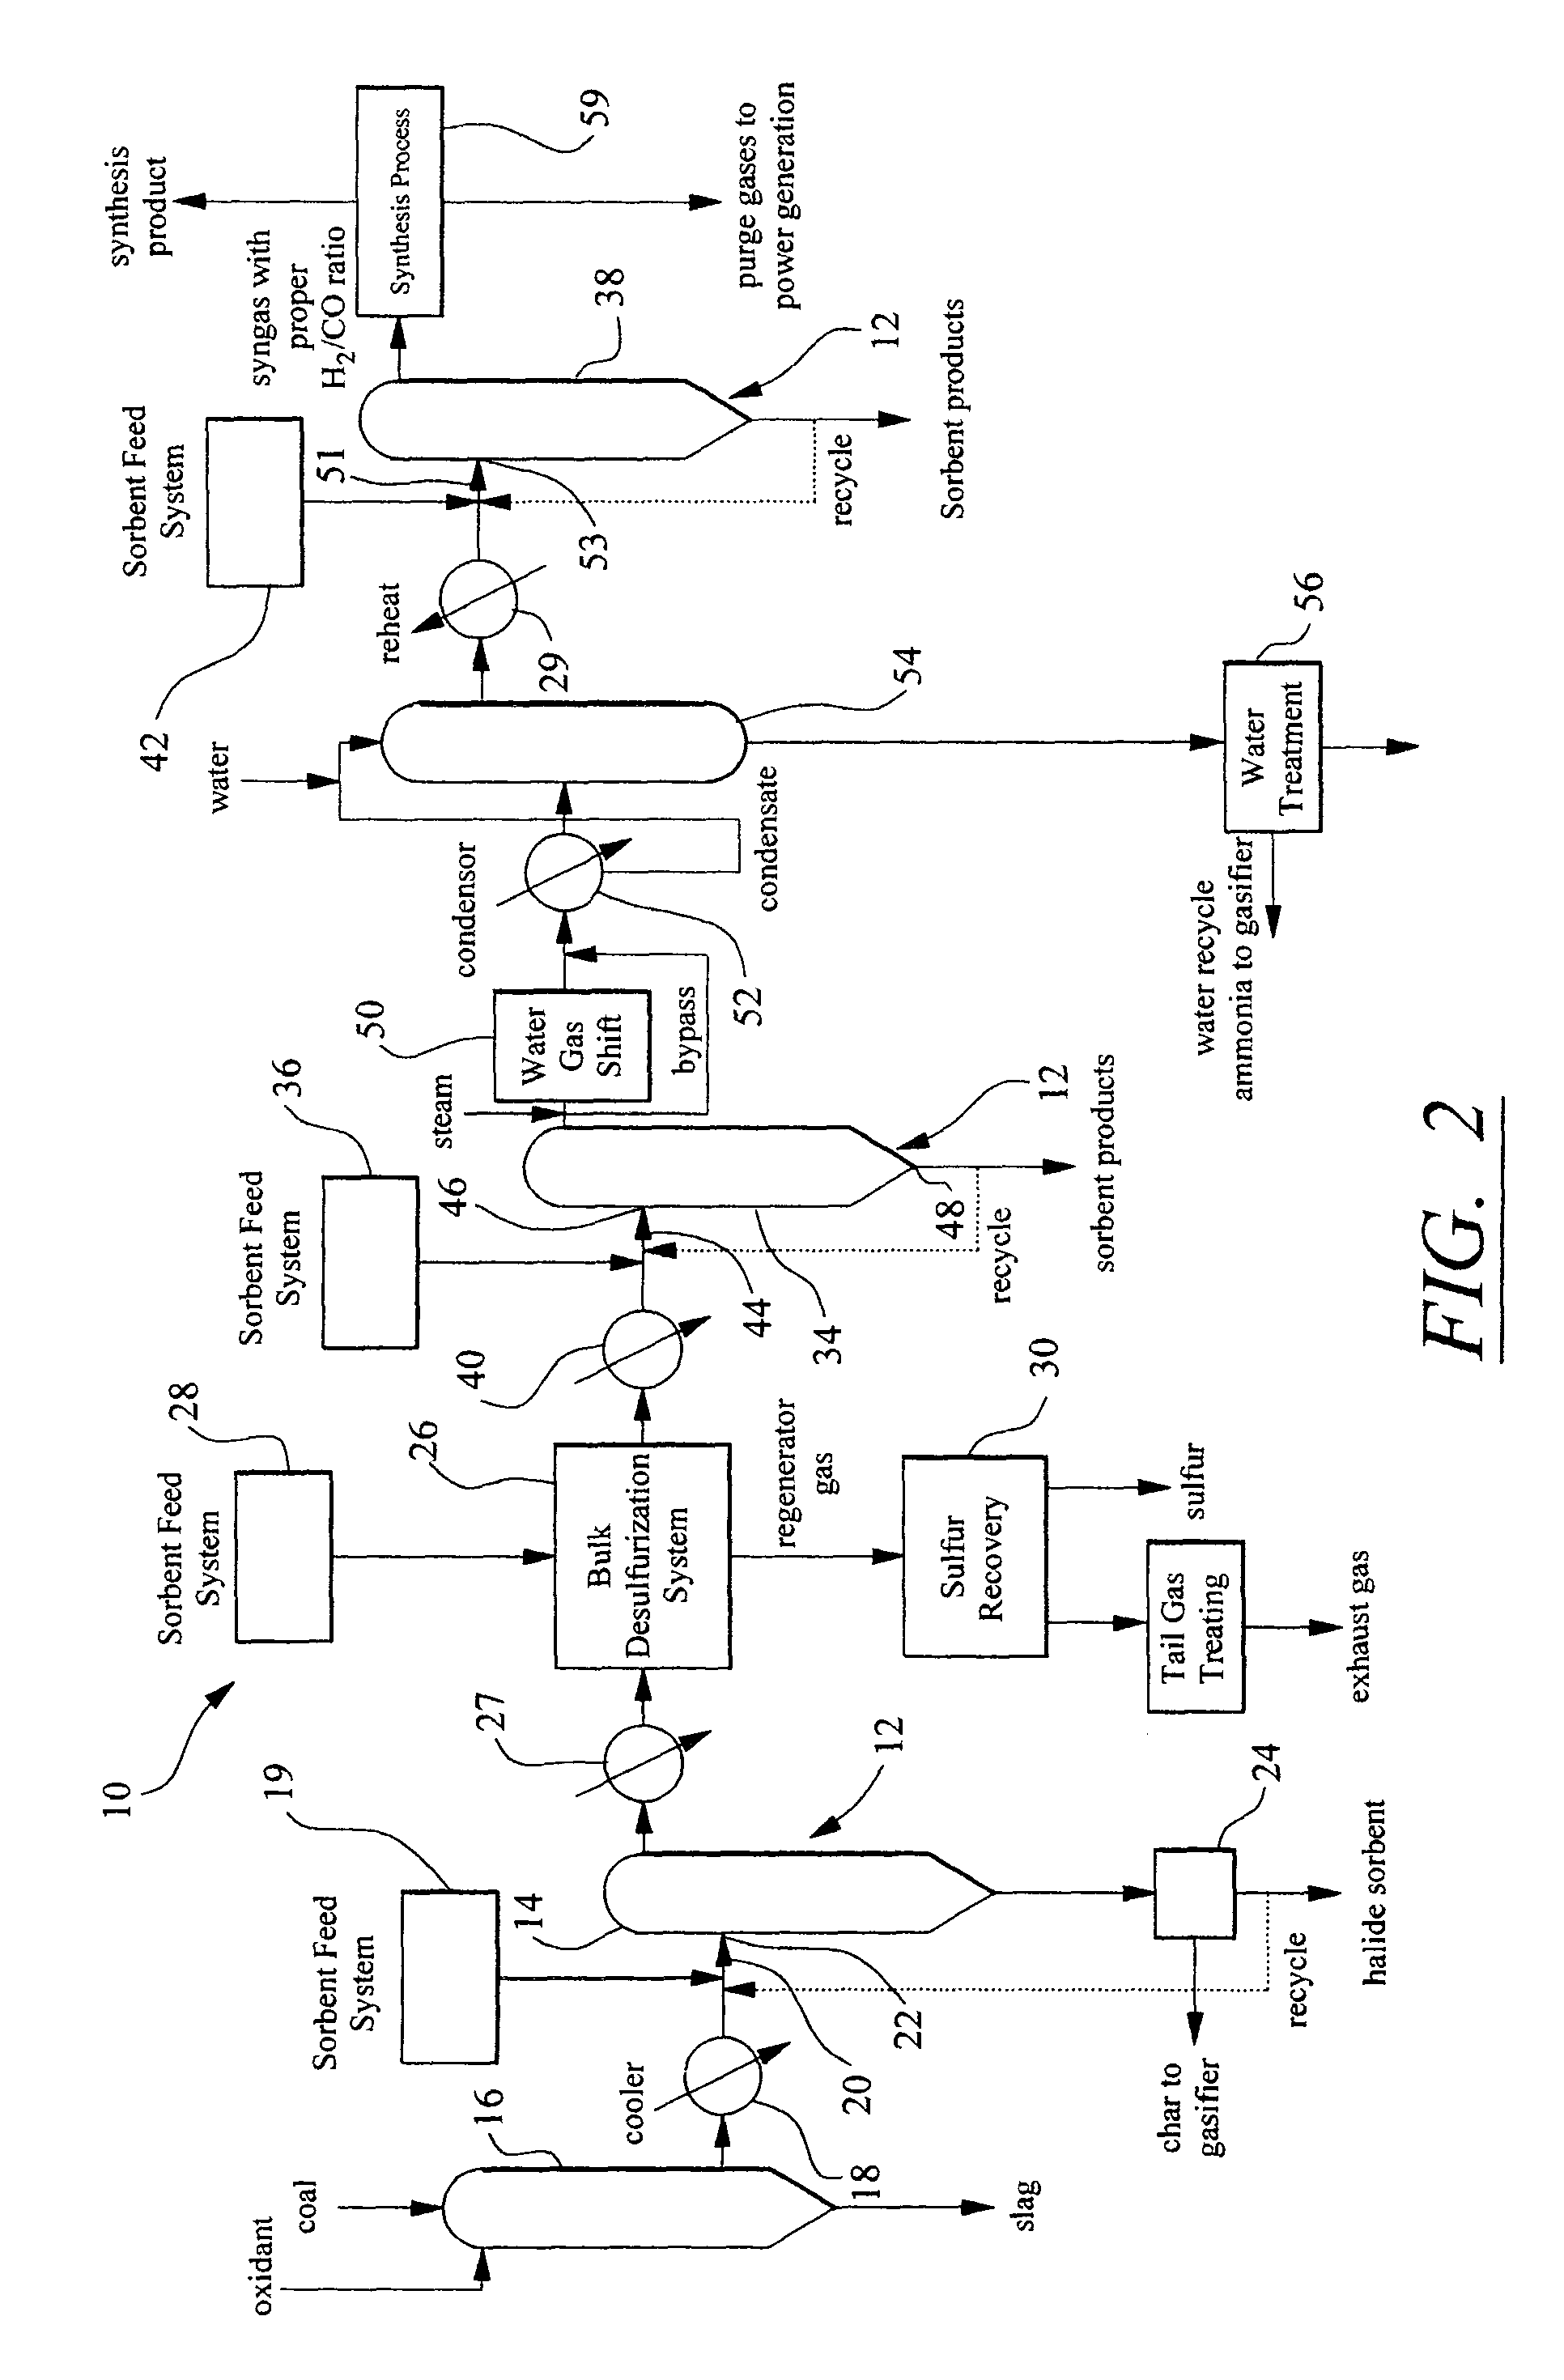 Gas cleaning system and method